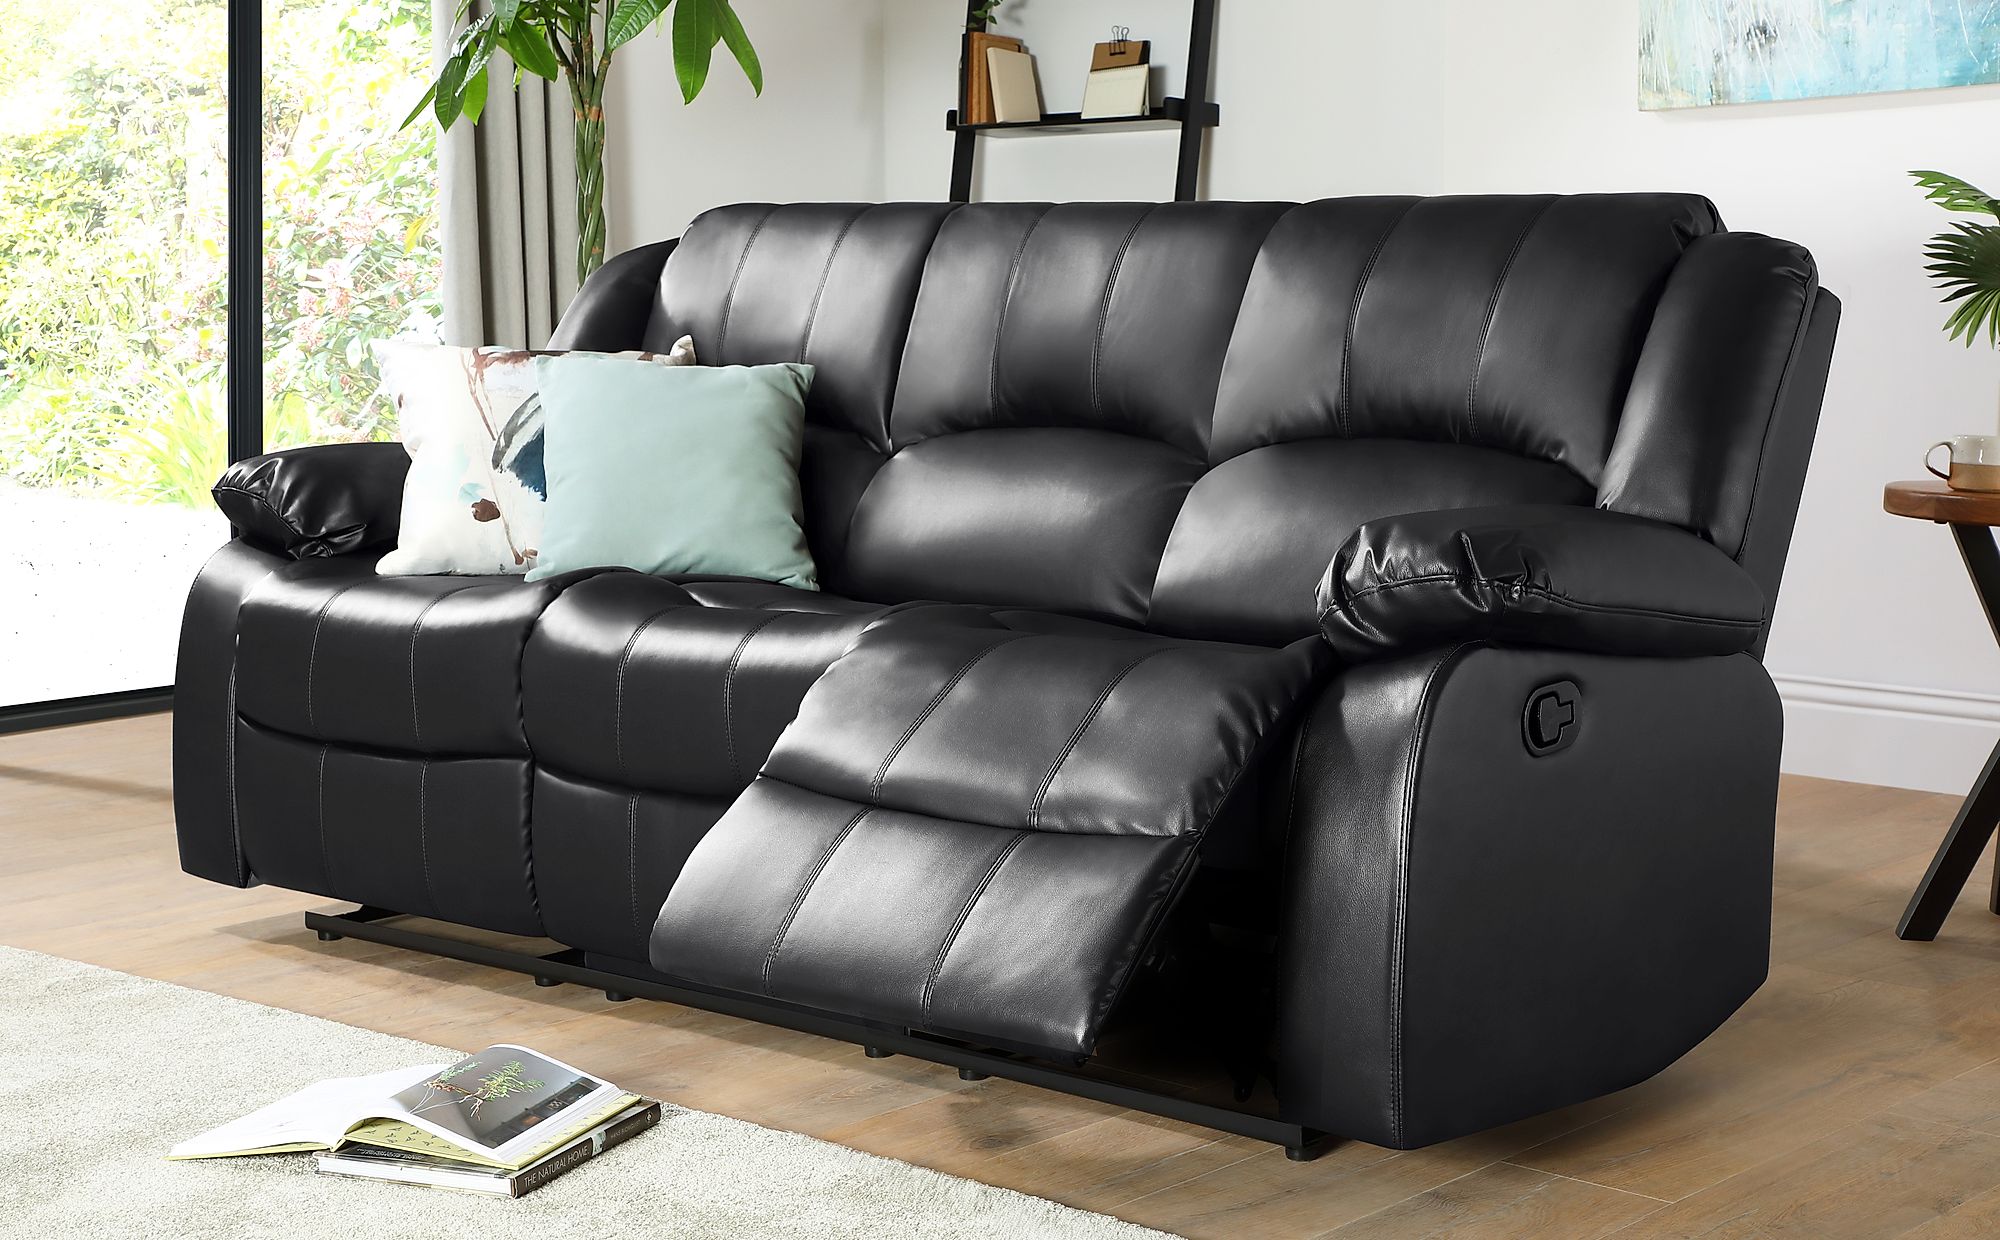 4 seater black leather recliner sofa